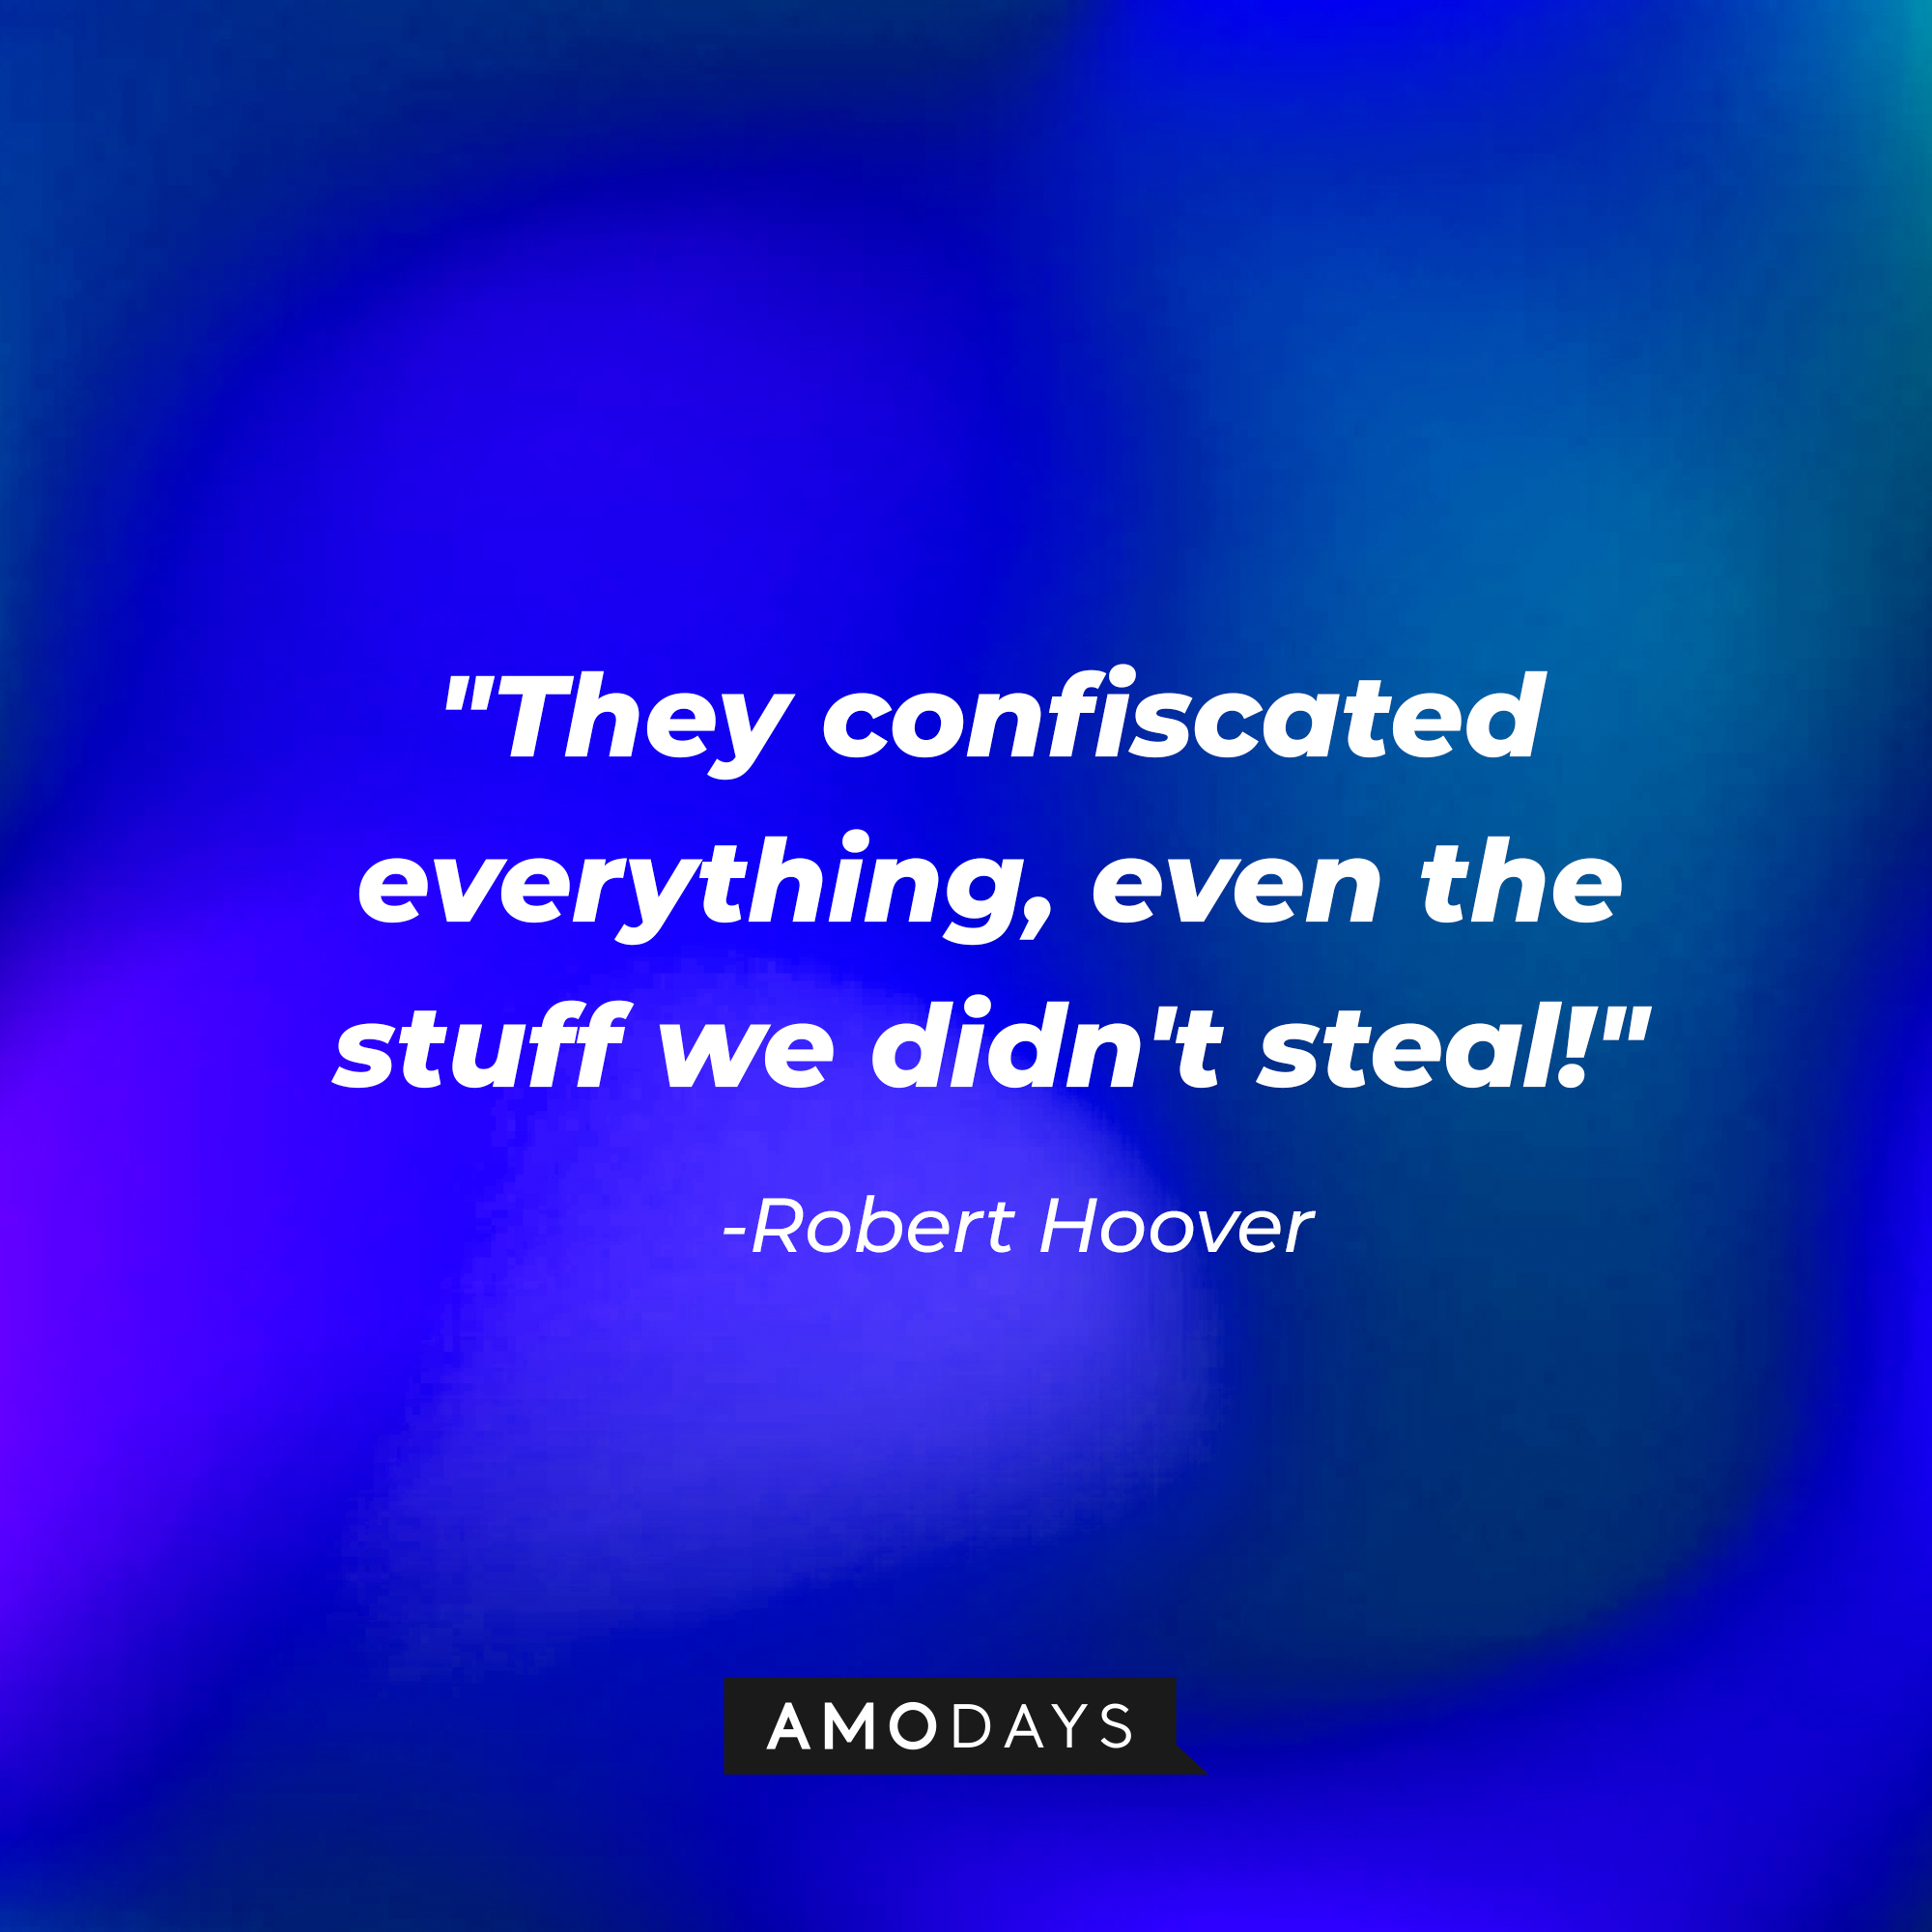 Robert Hoover's quote: “They confiscated everything, even the stuff we didn't steal!" | Source: Amodays